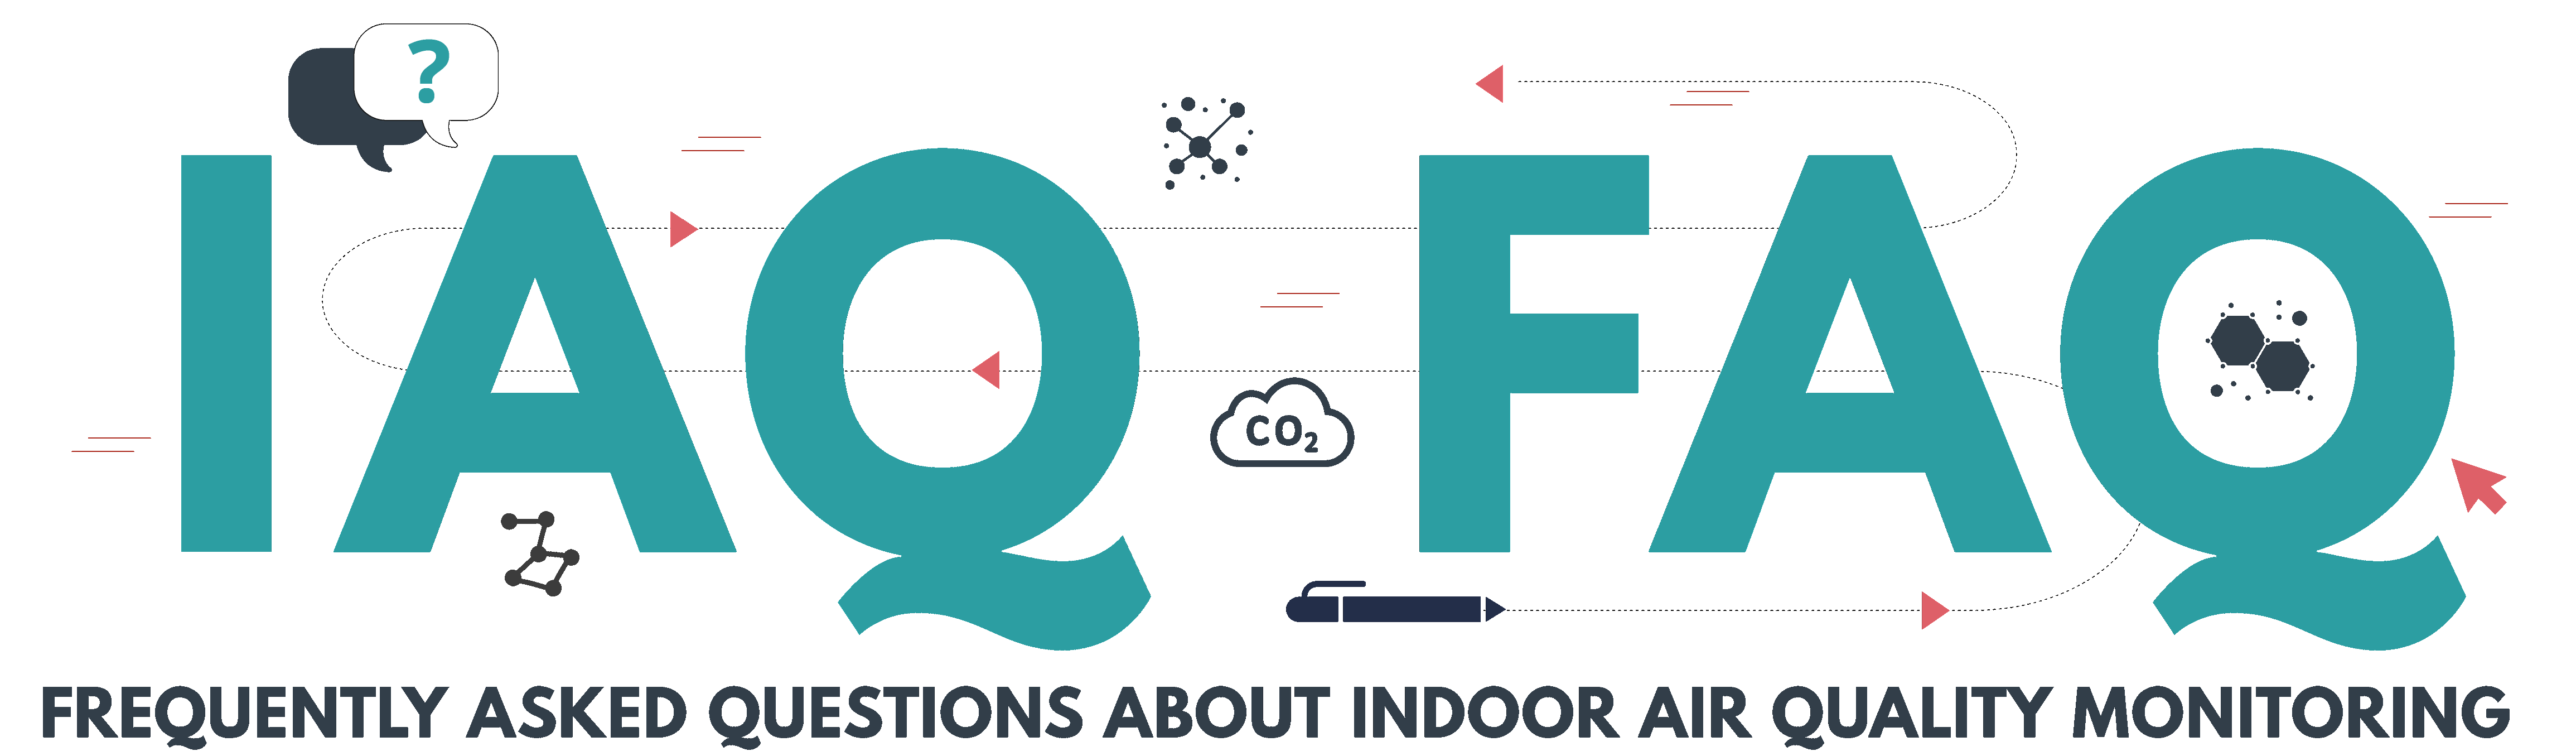 frequently asked questions about indoor air quality monitoring